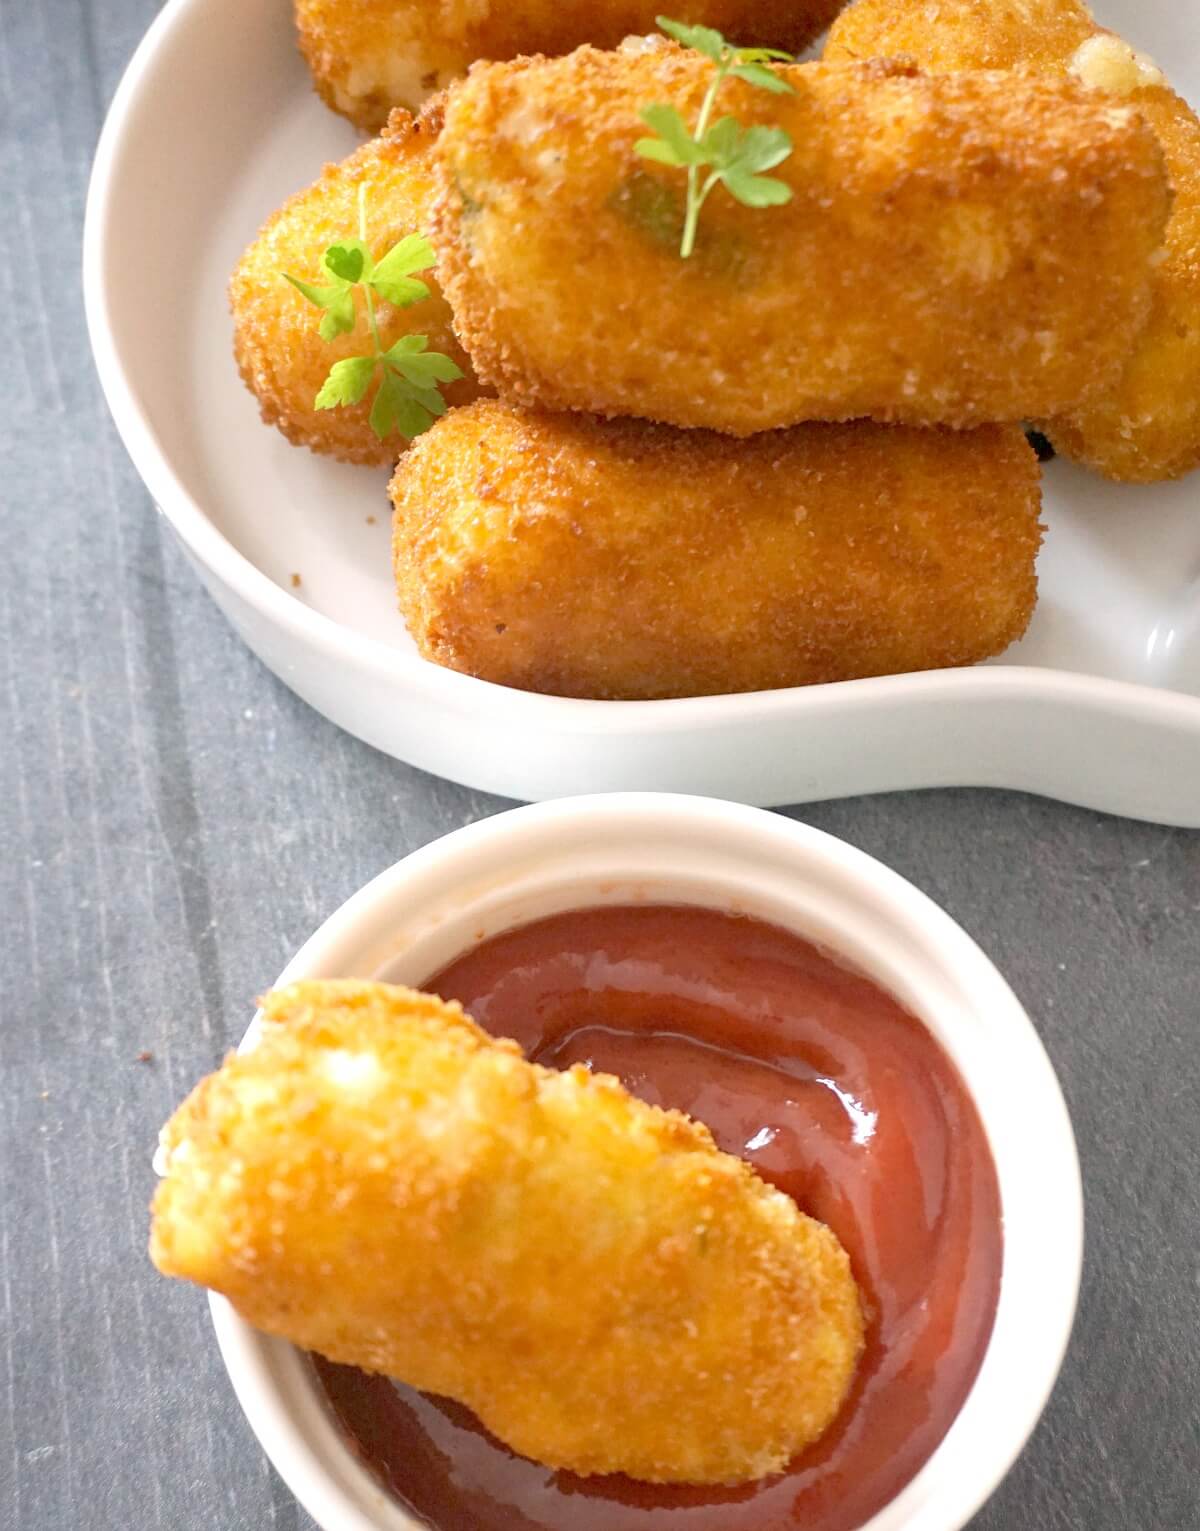 A small bowl with ketchup and a croquette, and another bowl with more croquettes.